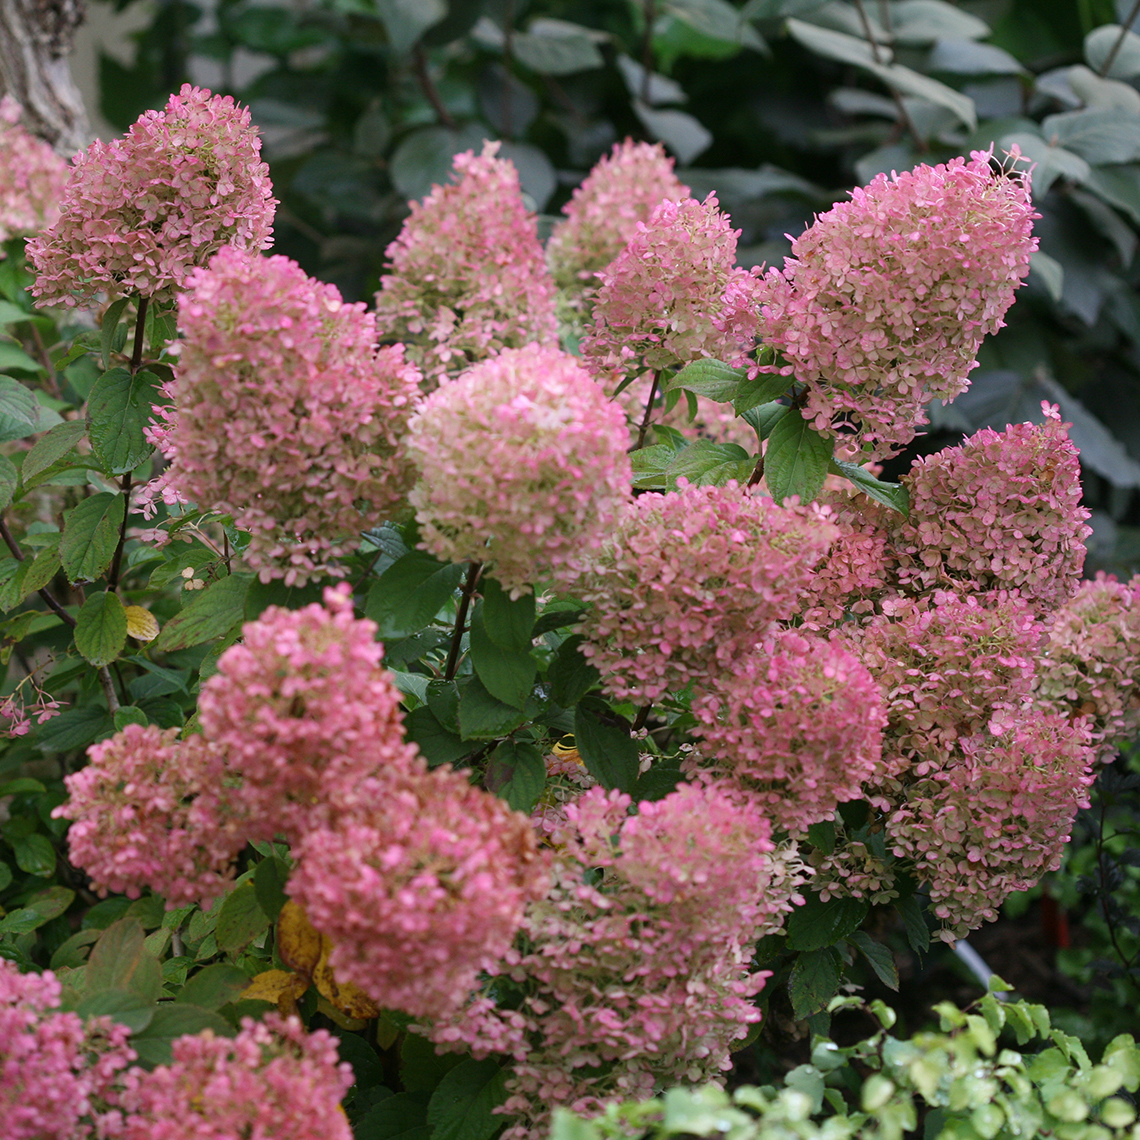 Several blooms of Bobo panicle hydrangea in their pink phase